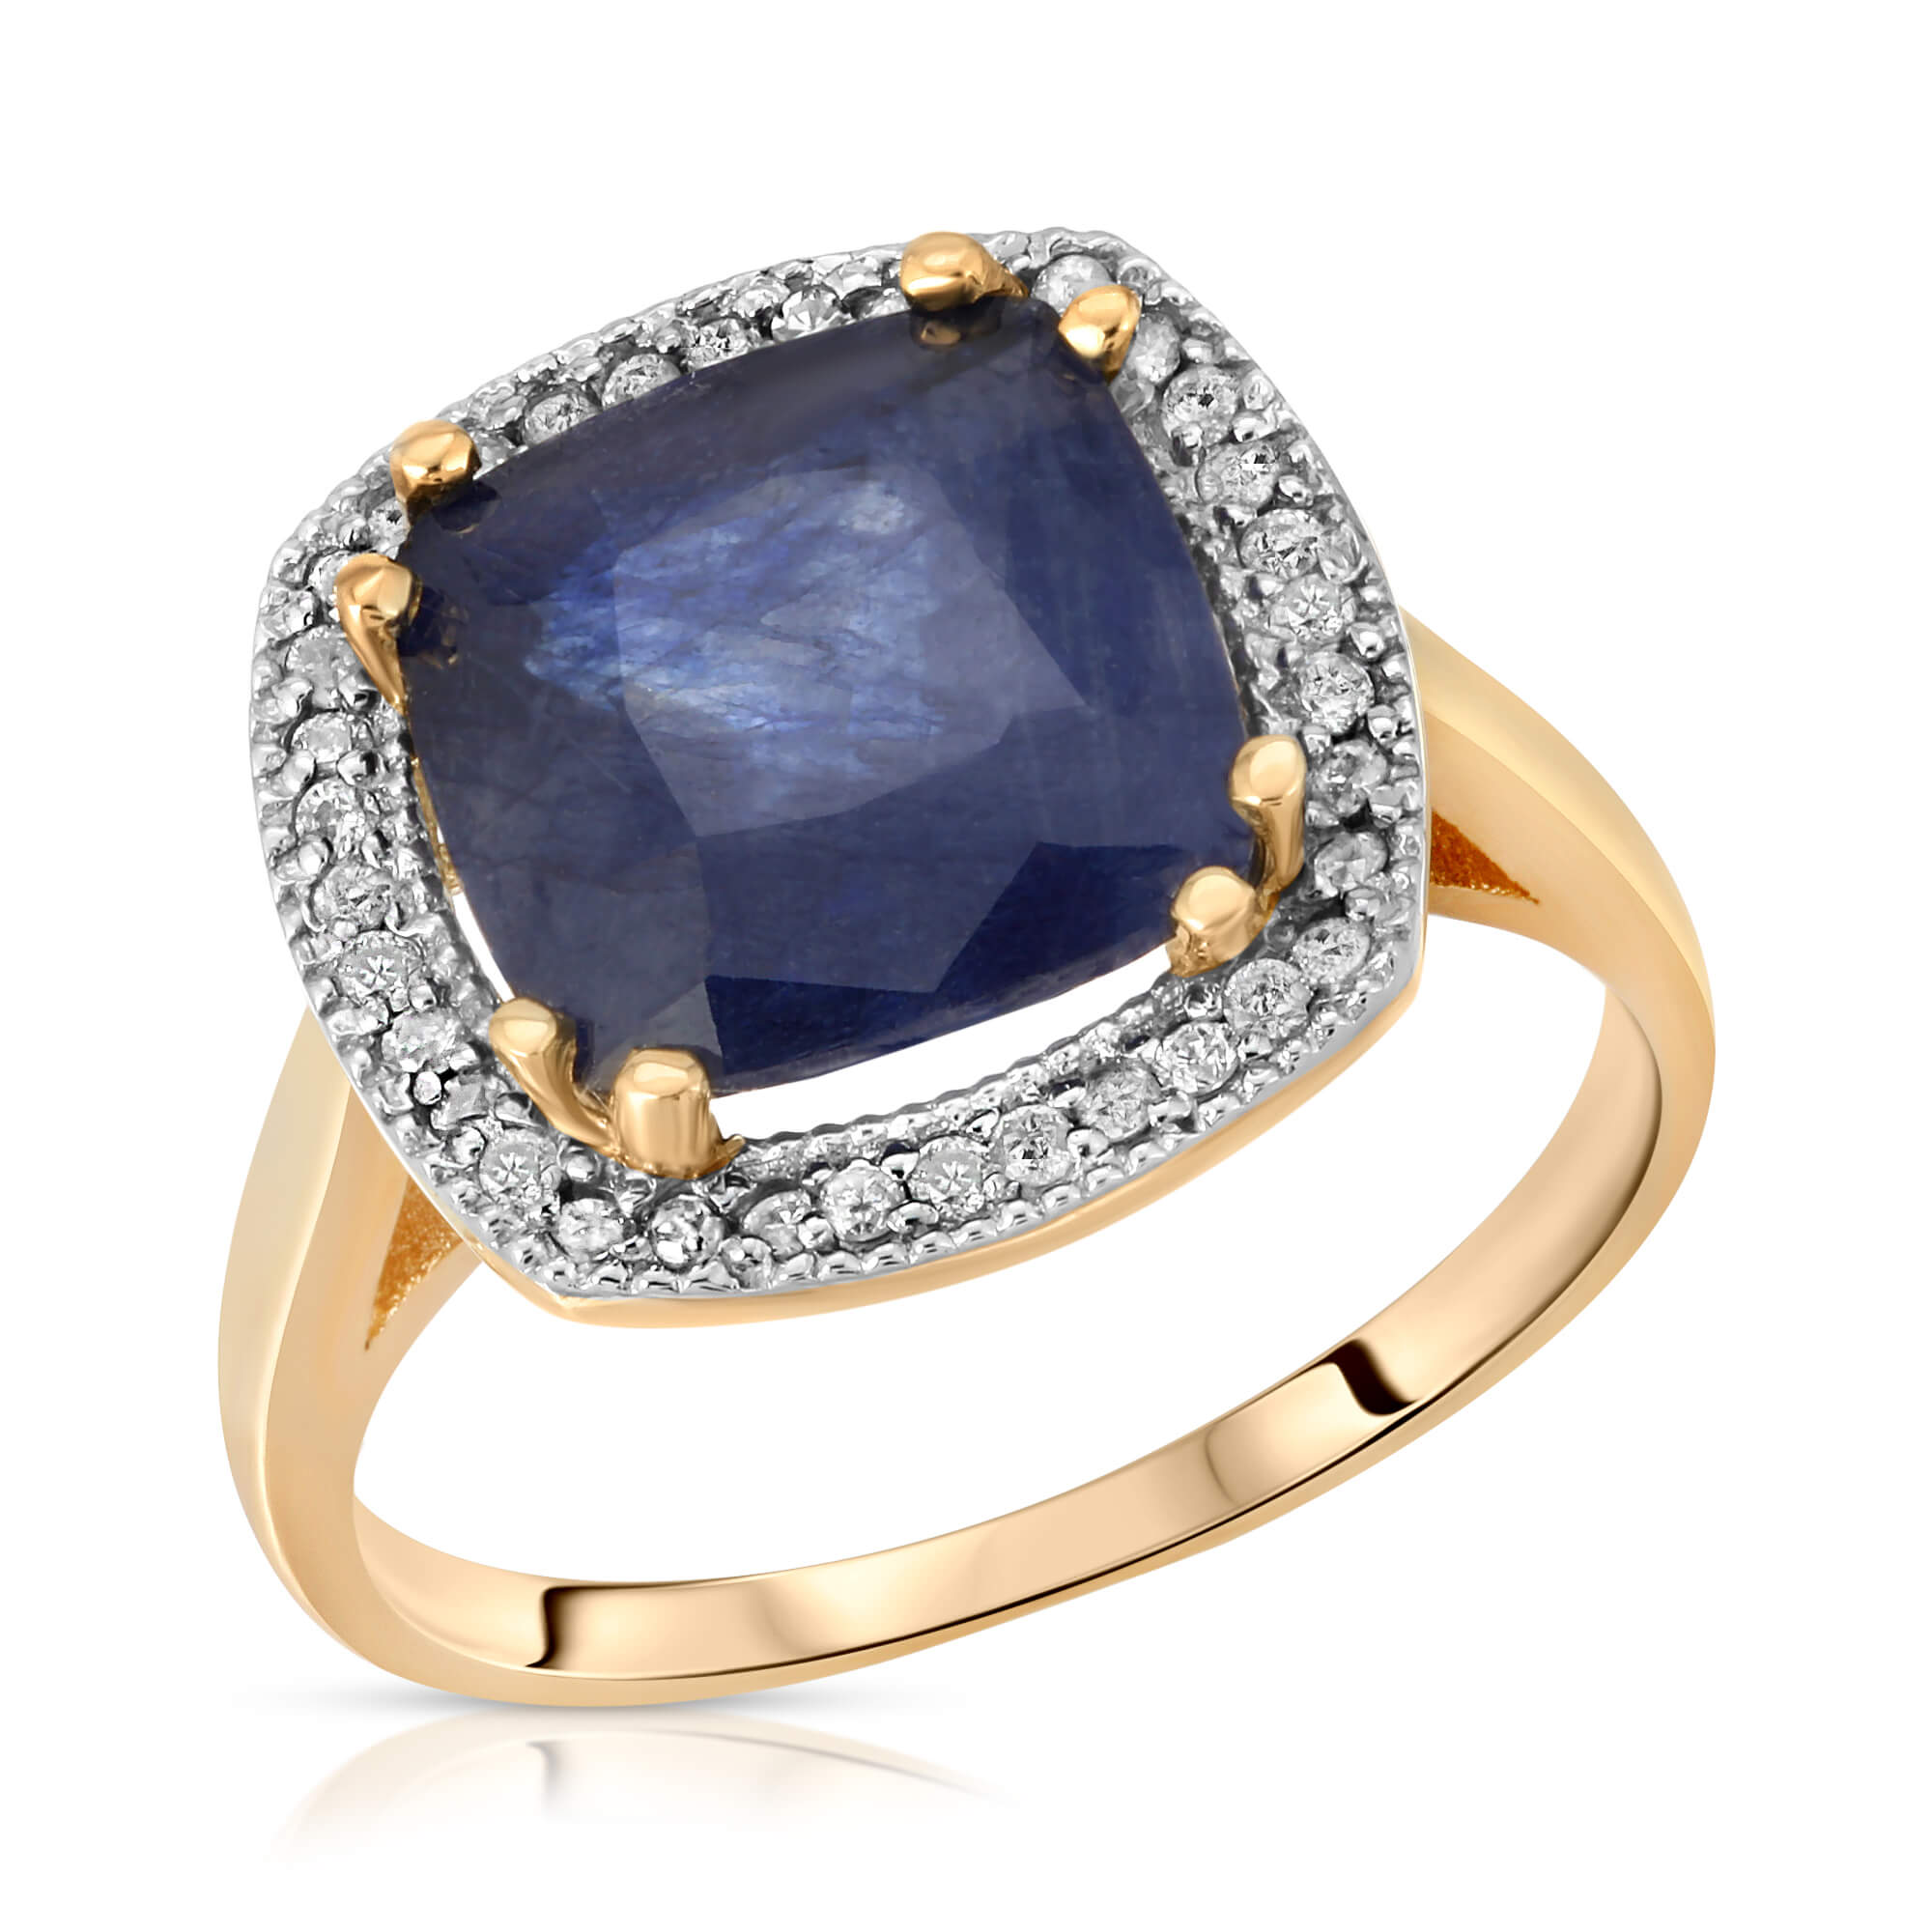 Cushion Cut Sapphire Ring 5.9 ctw in 9ct Gold